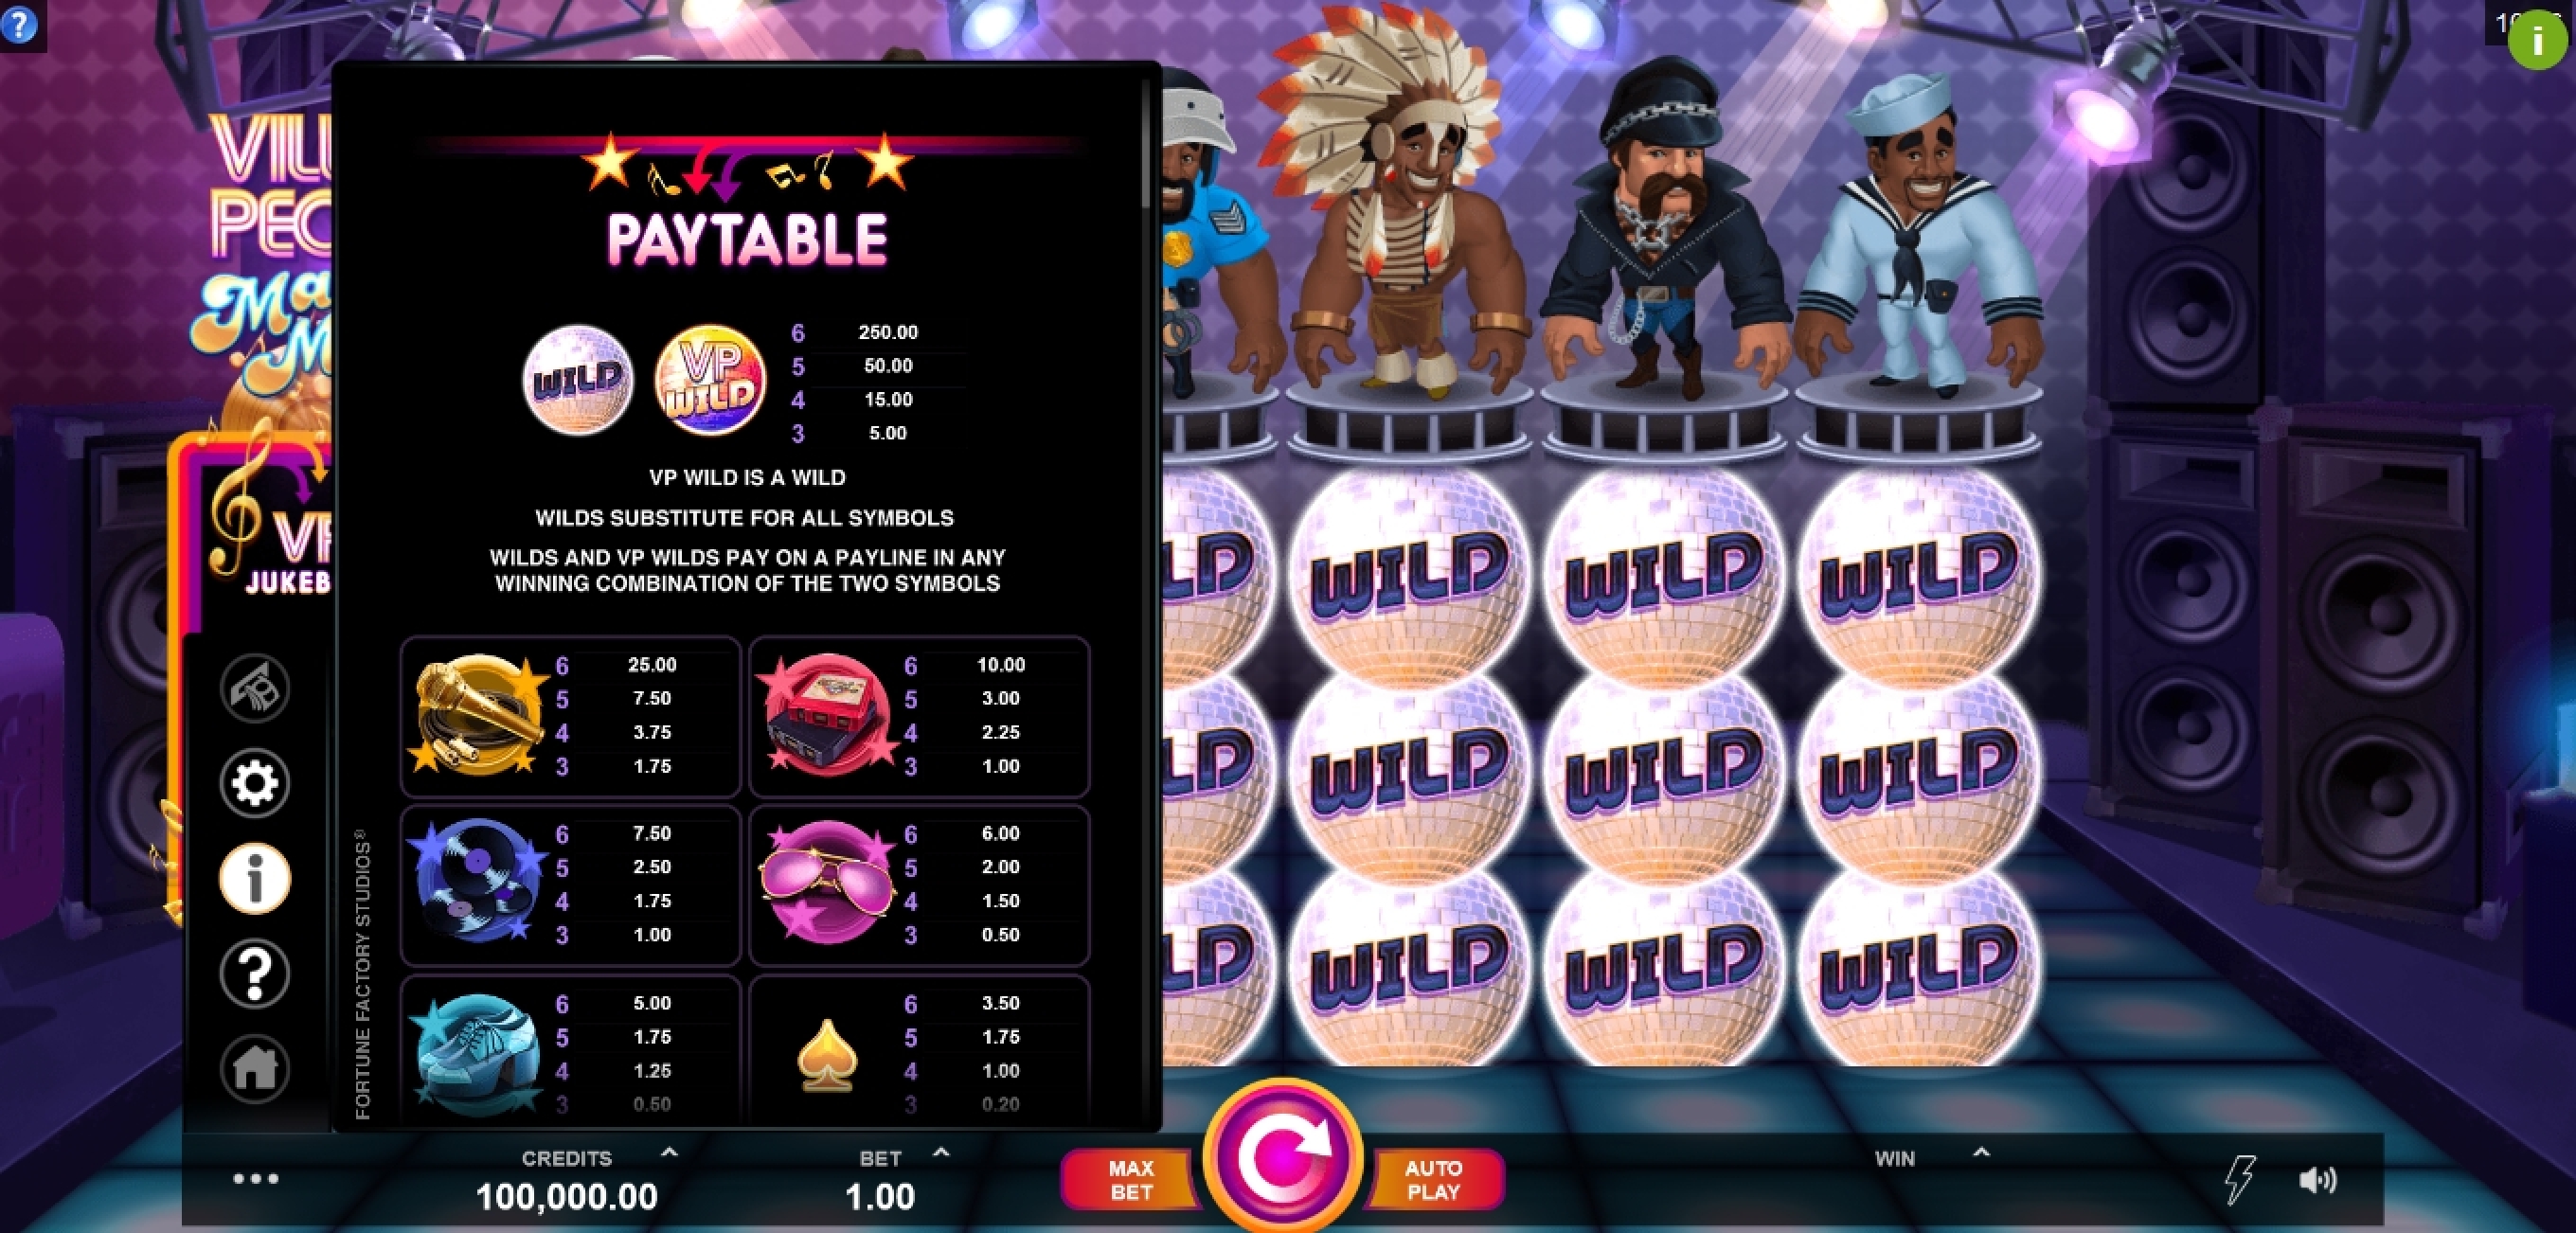 Info of Village People Macho Moves Slot Game by Fortune Factory Studios